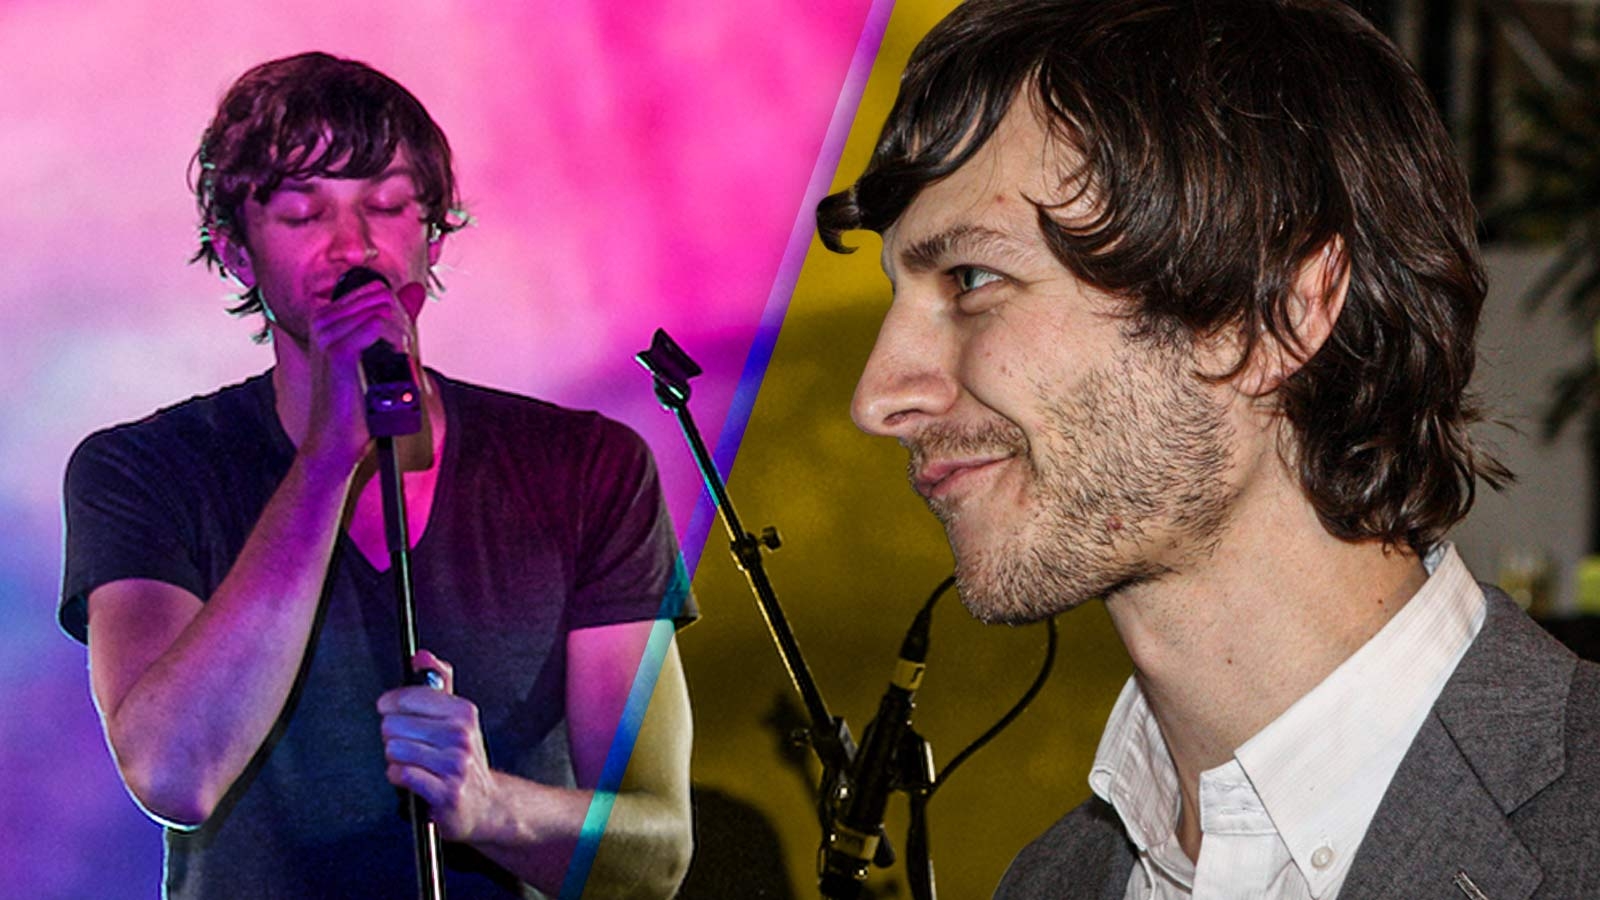 “I guess he’s somebody that we used to know”: Gotye’s Iconic Song Turns 13 But Fans Are Worried About the Singer After He Vanished from Mainstream Without a Trace